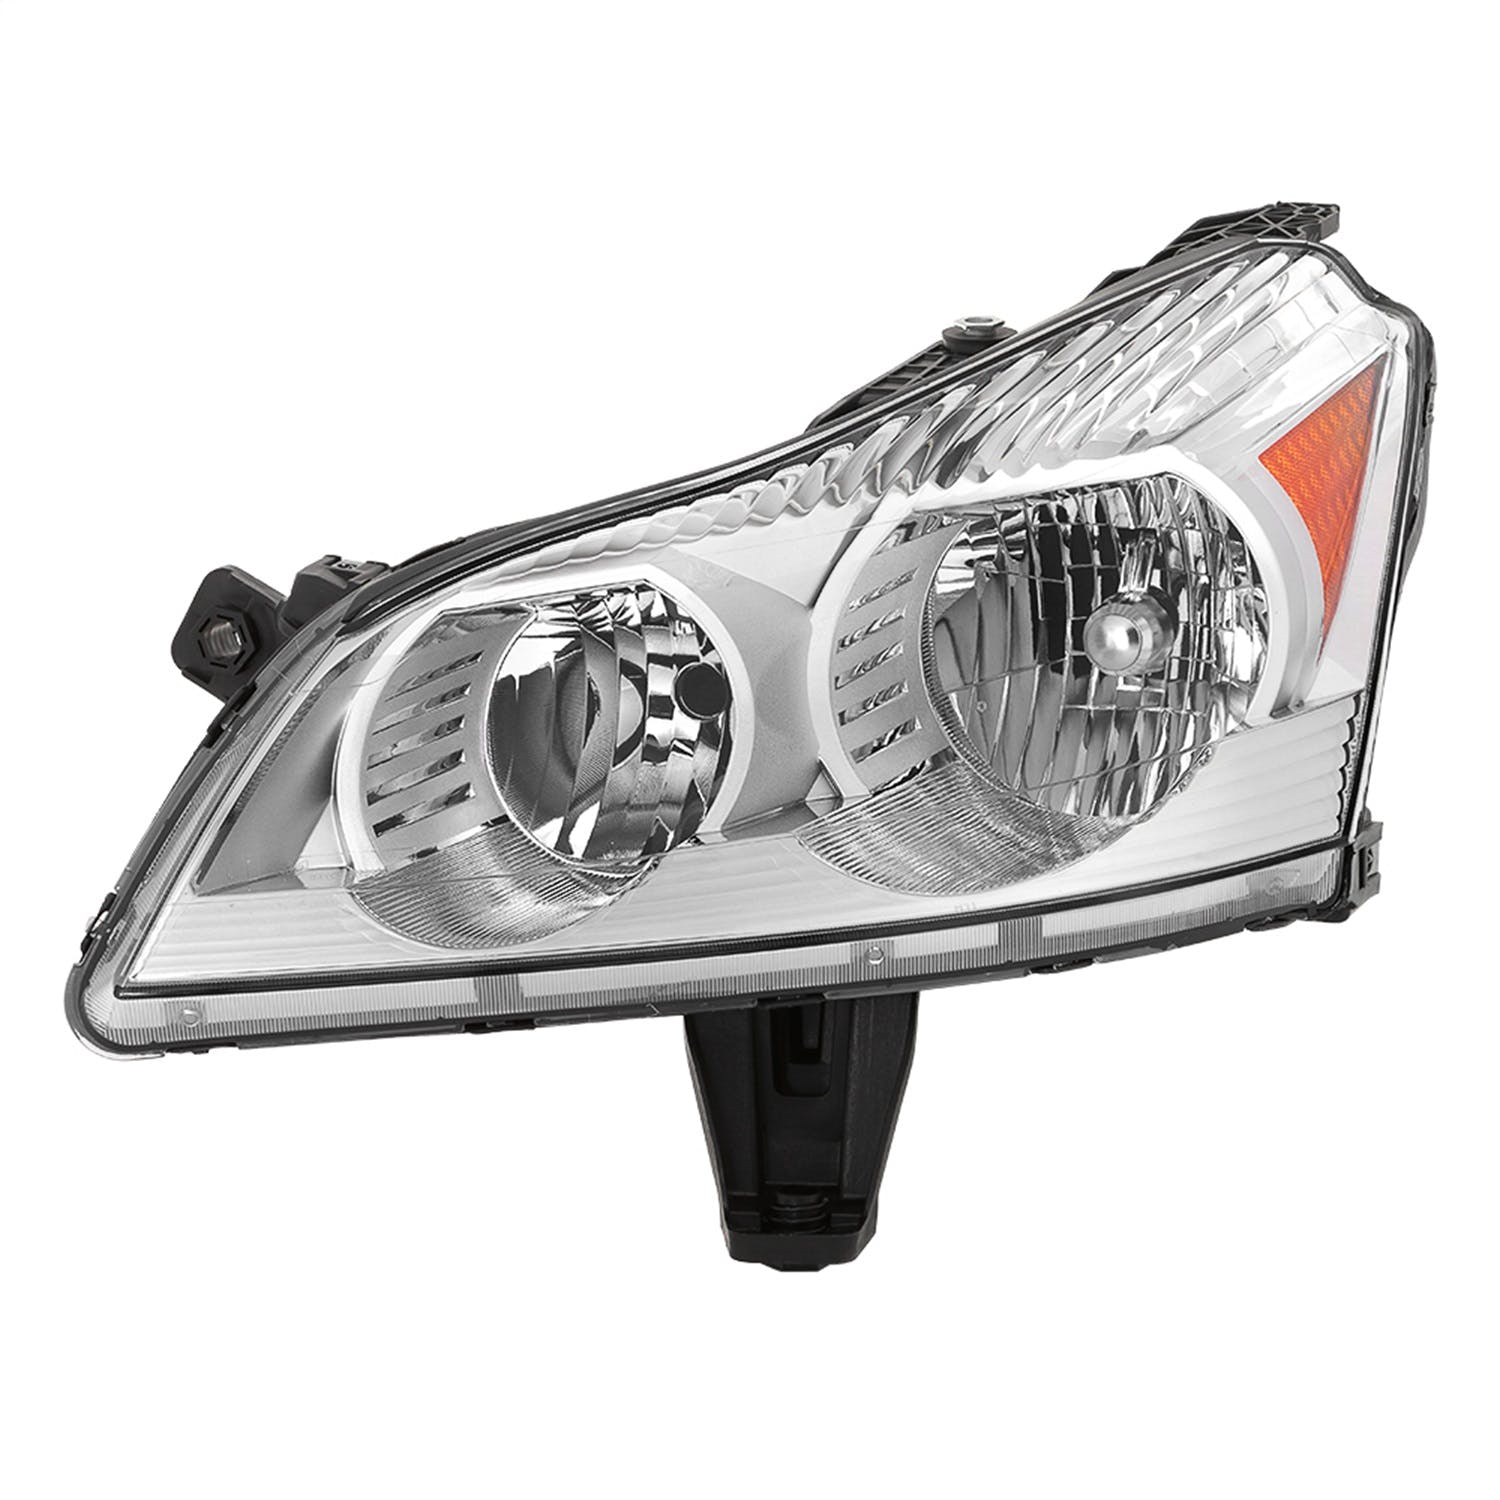 XTUNE POWER 9042553 Chevy Traverse 09 12 ( Does Not Fit LTZ Models ) Driver Side Headlights OEM Left